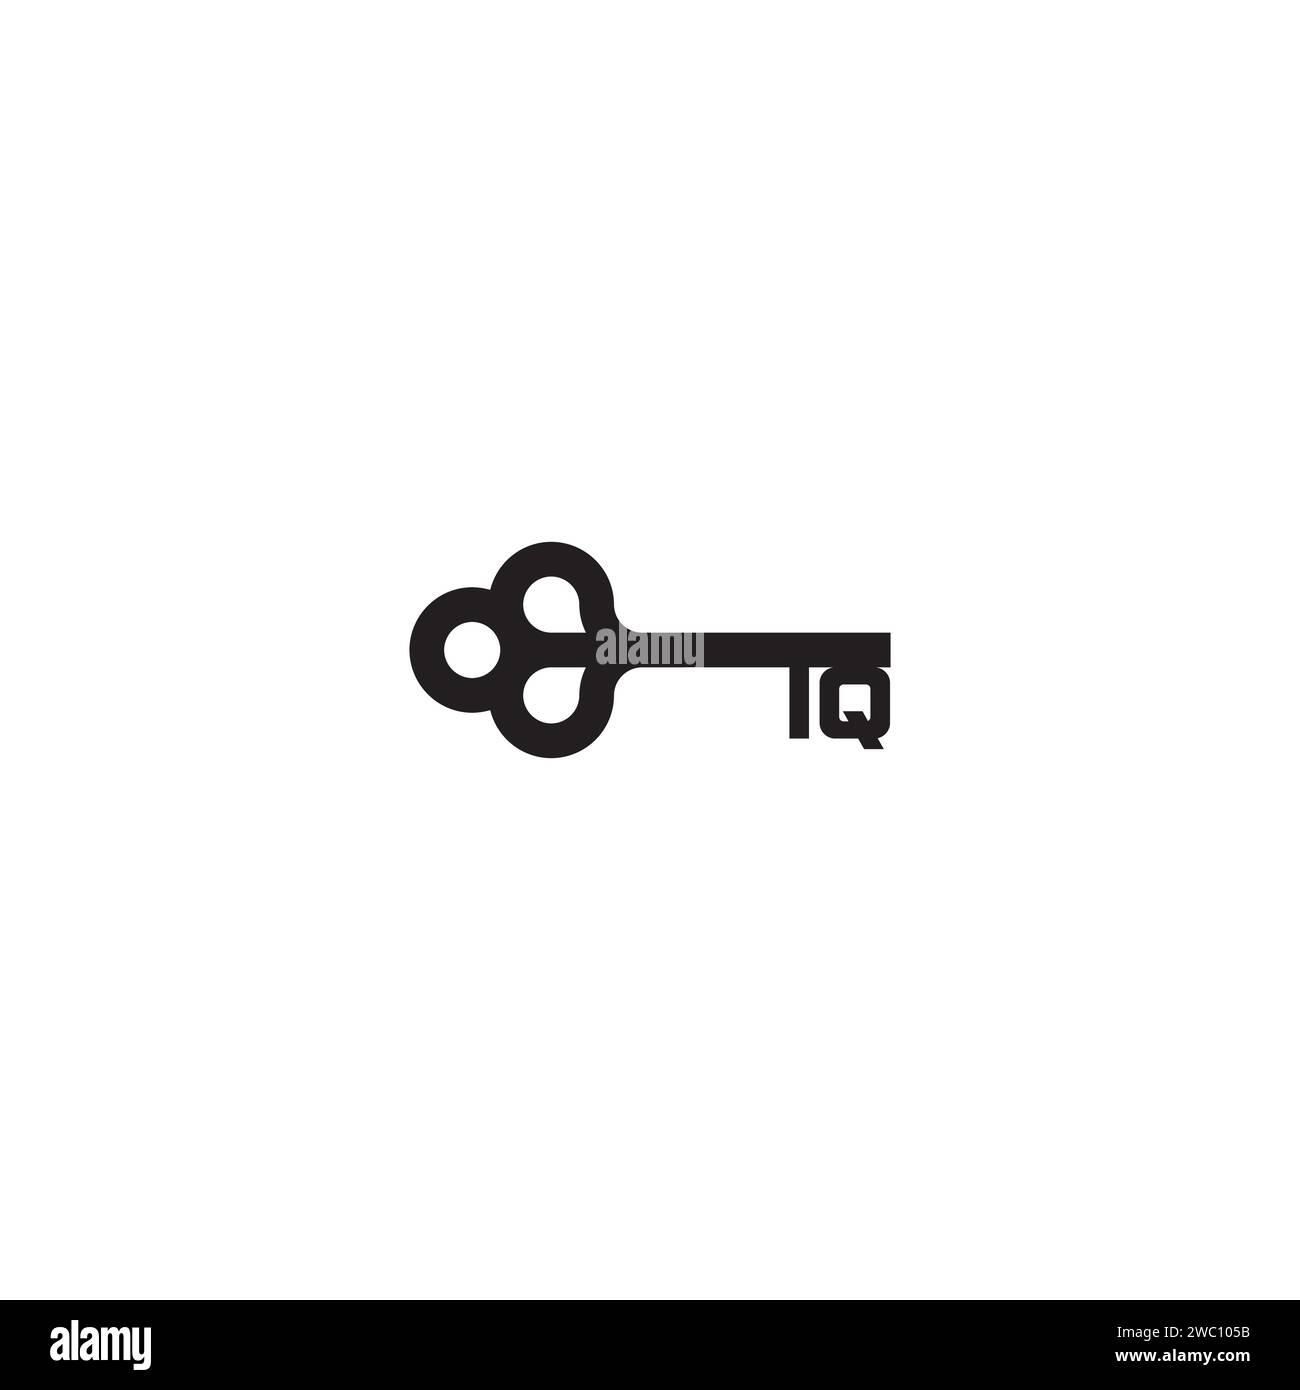 IQ key concept in high quality professional design that will print well across any print media Stock Vector